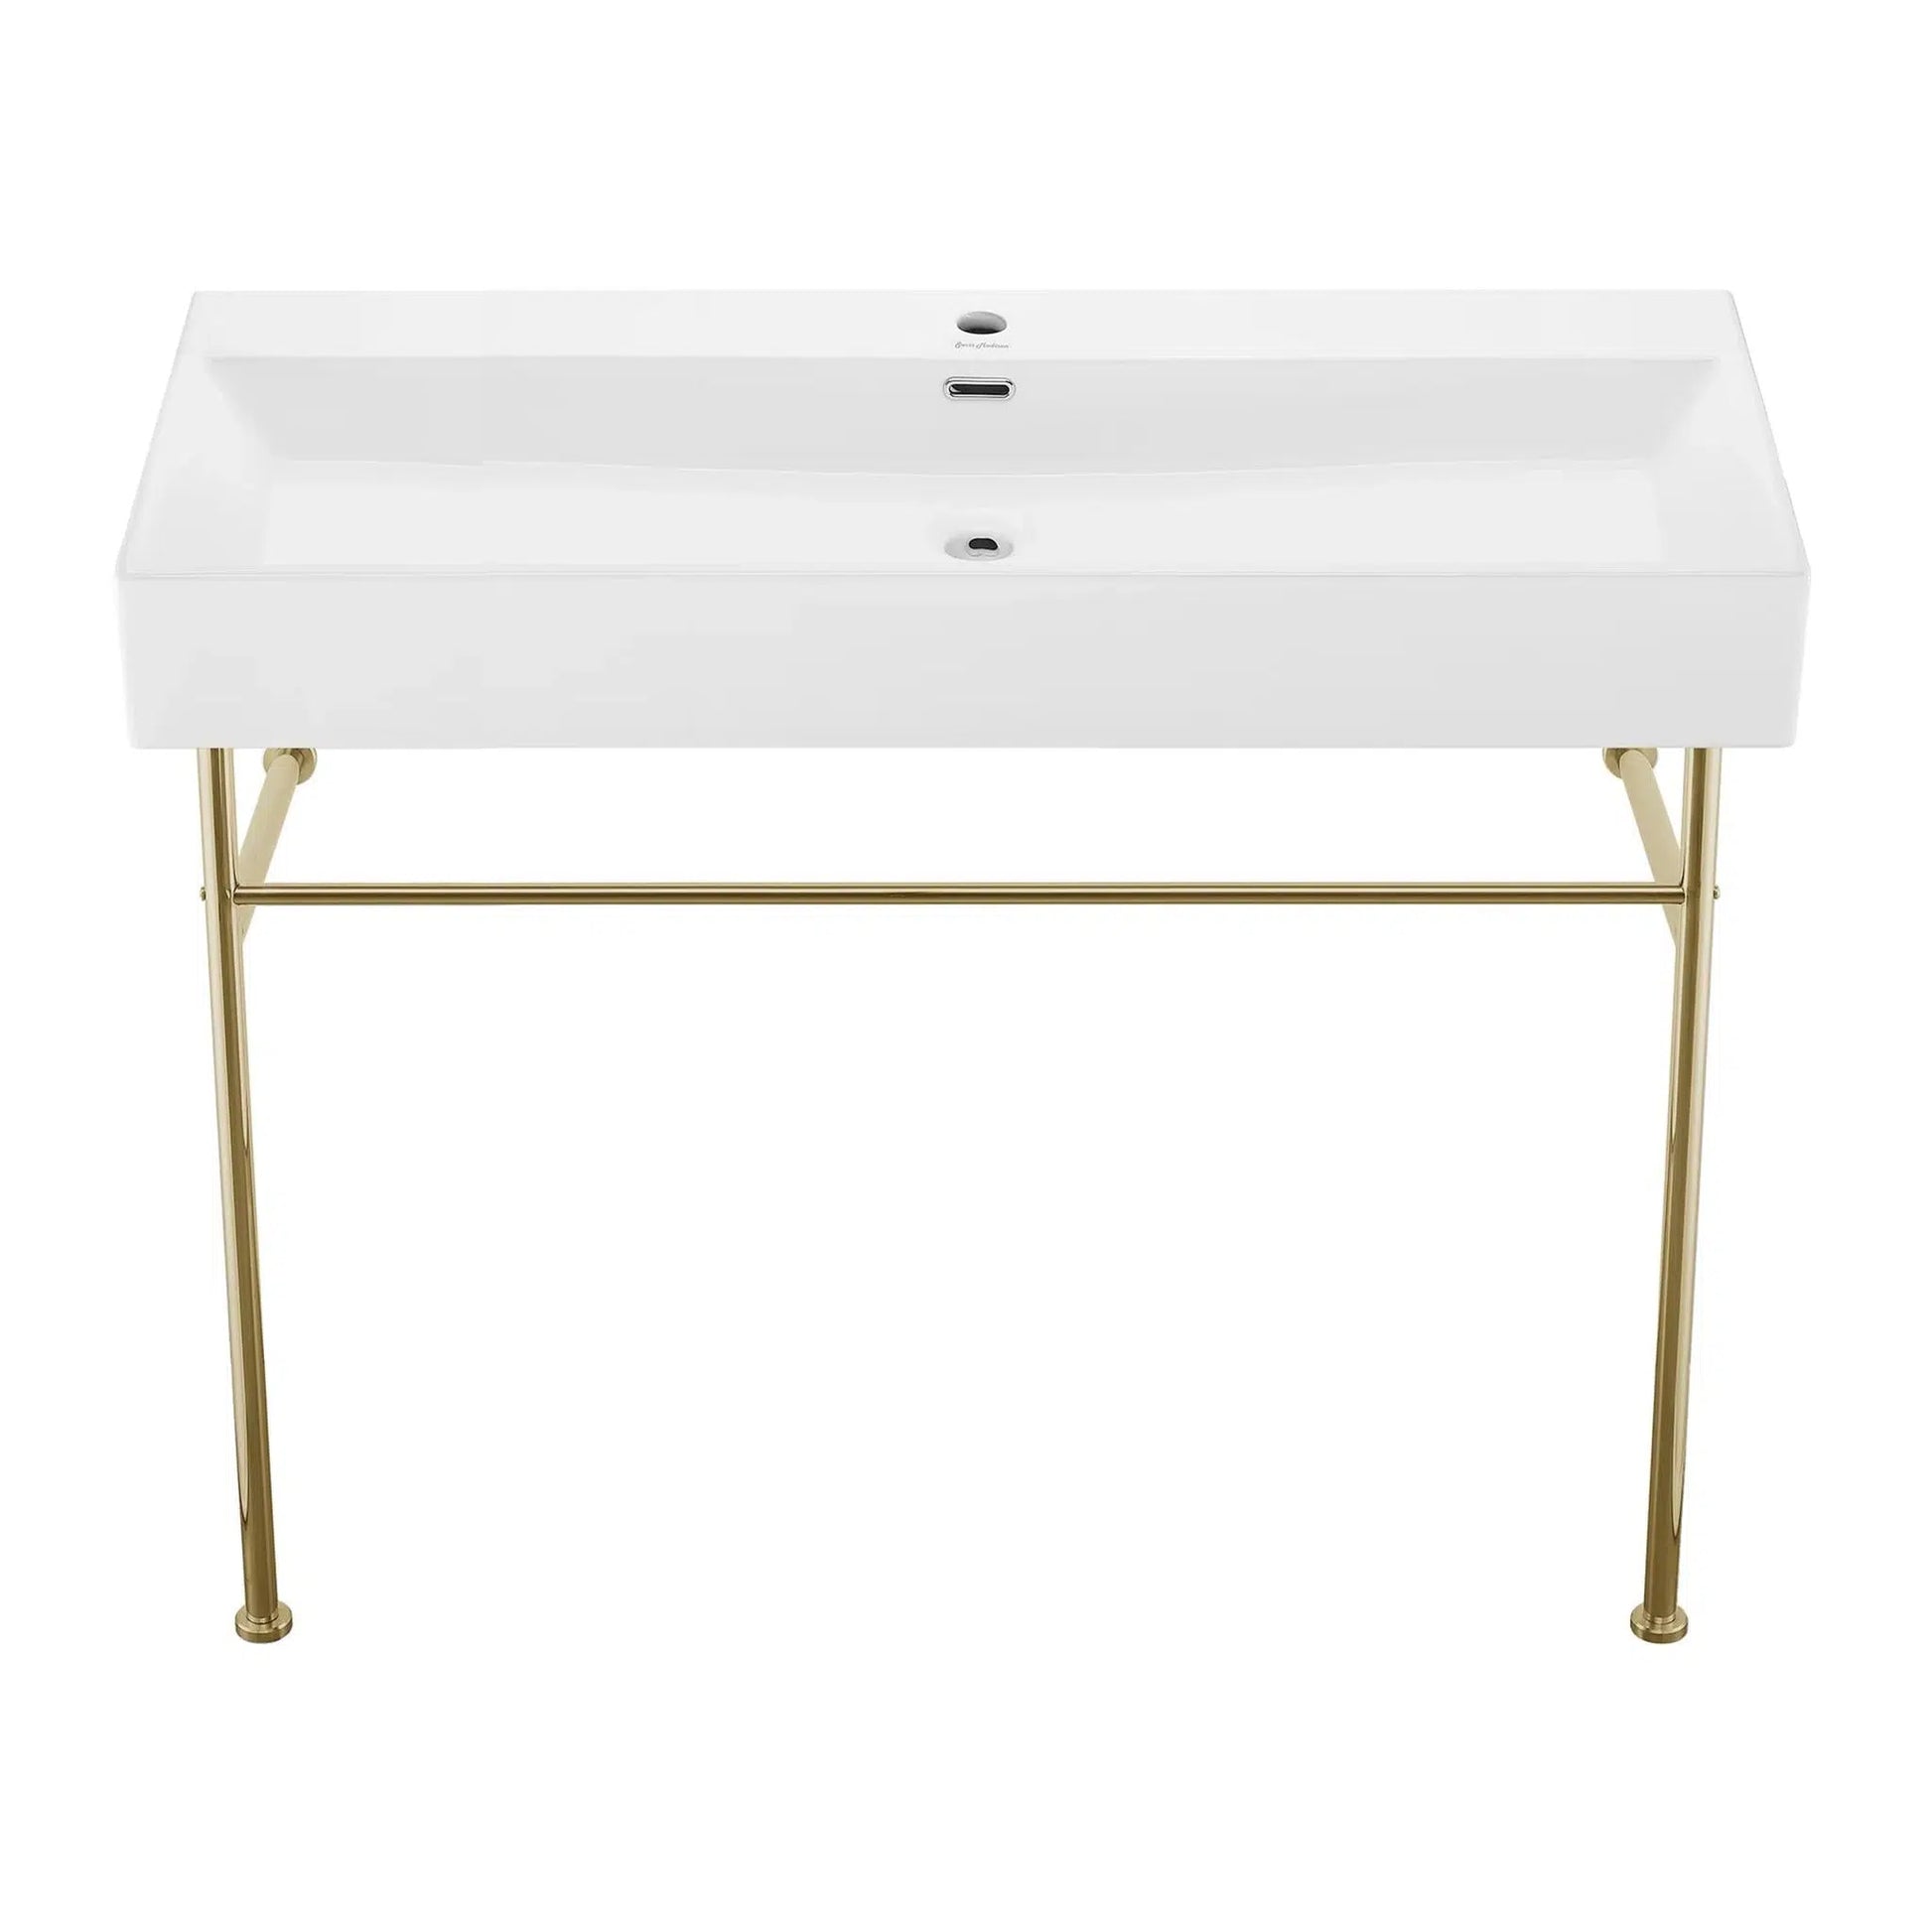 Swiss Madison Claire 40" x 35" Wall-Mounted Console Sink With White Basin and Gold Legs